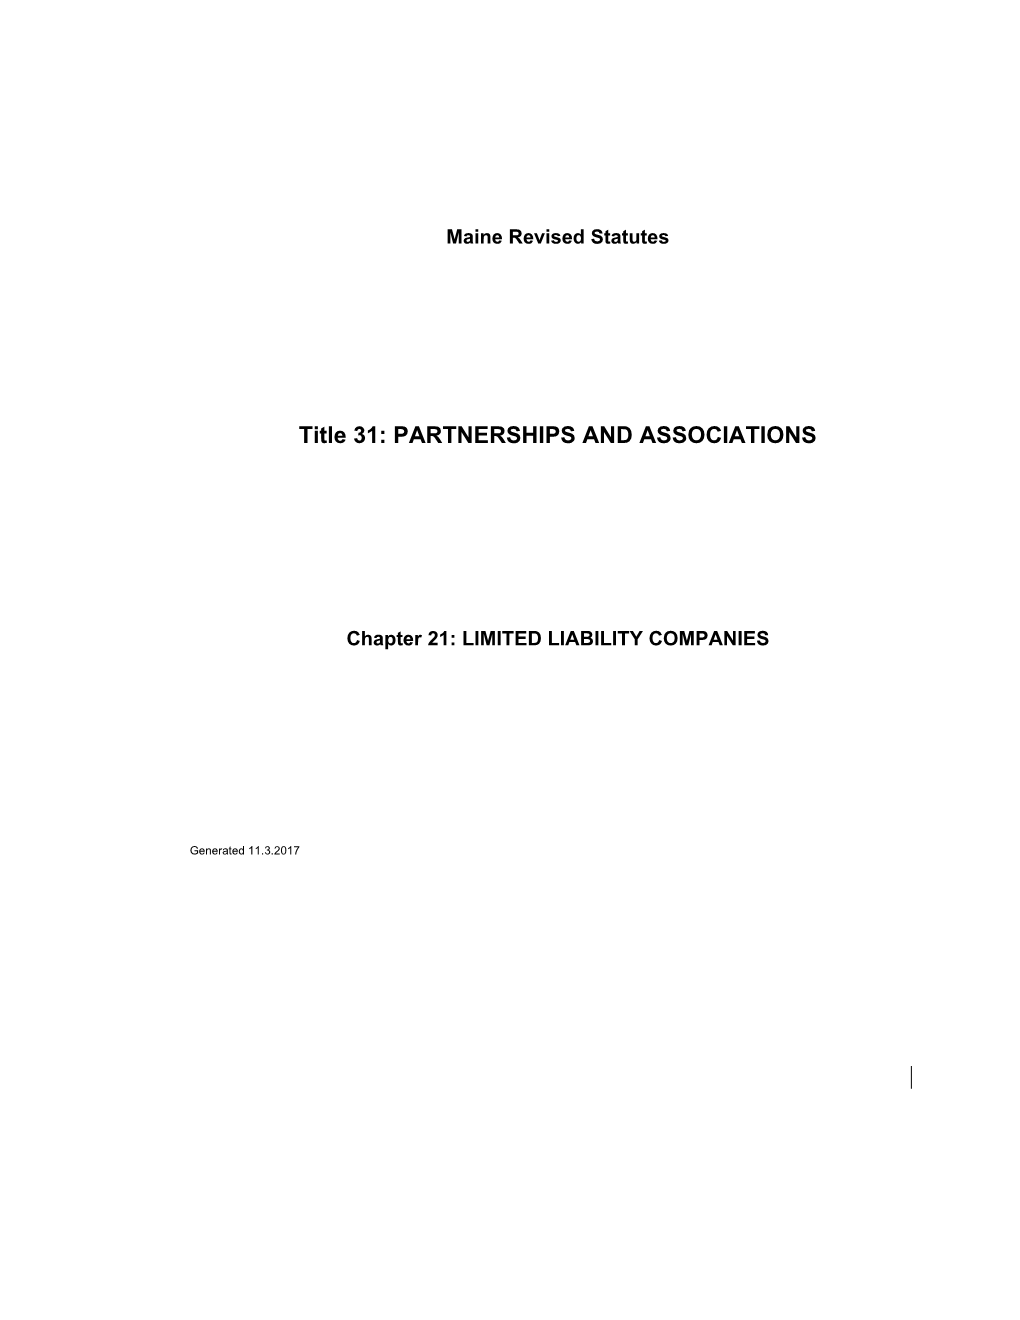 MRS Title 31 1601. APPLICATION of ASSETS in WINDING up LIMITED LIABILITY COMPANY's ACTIVITIES